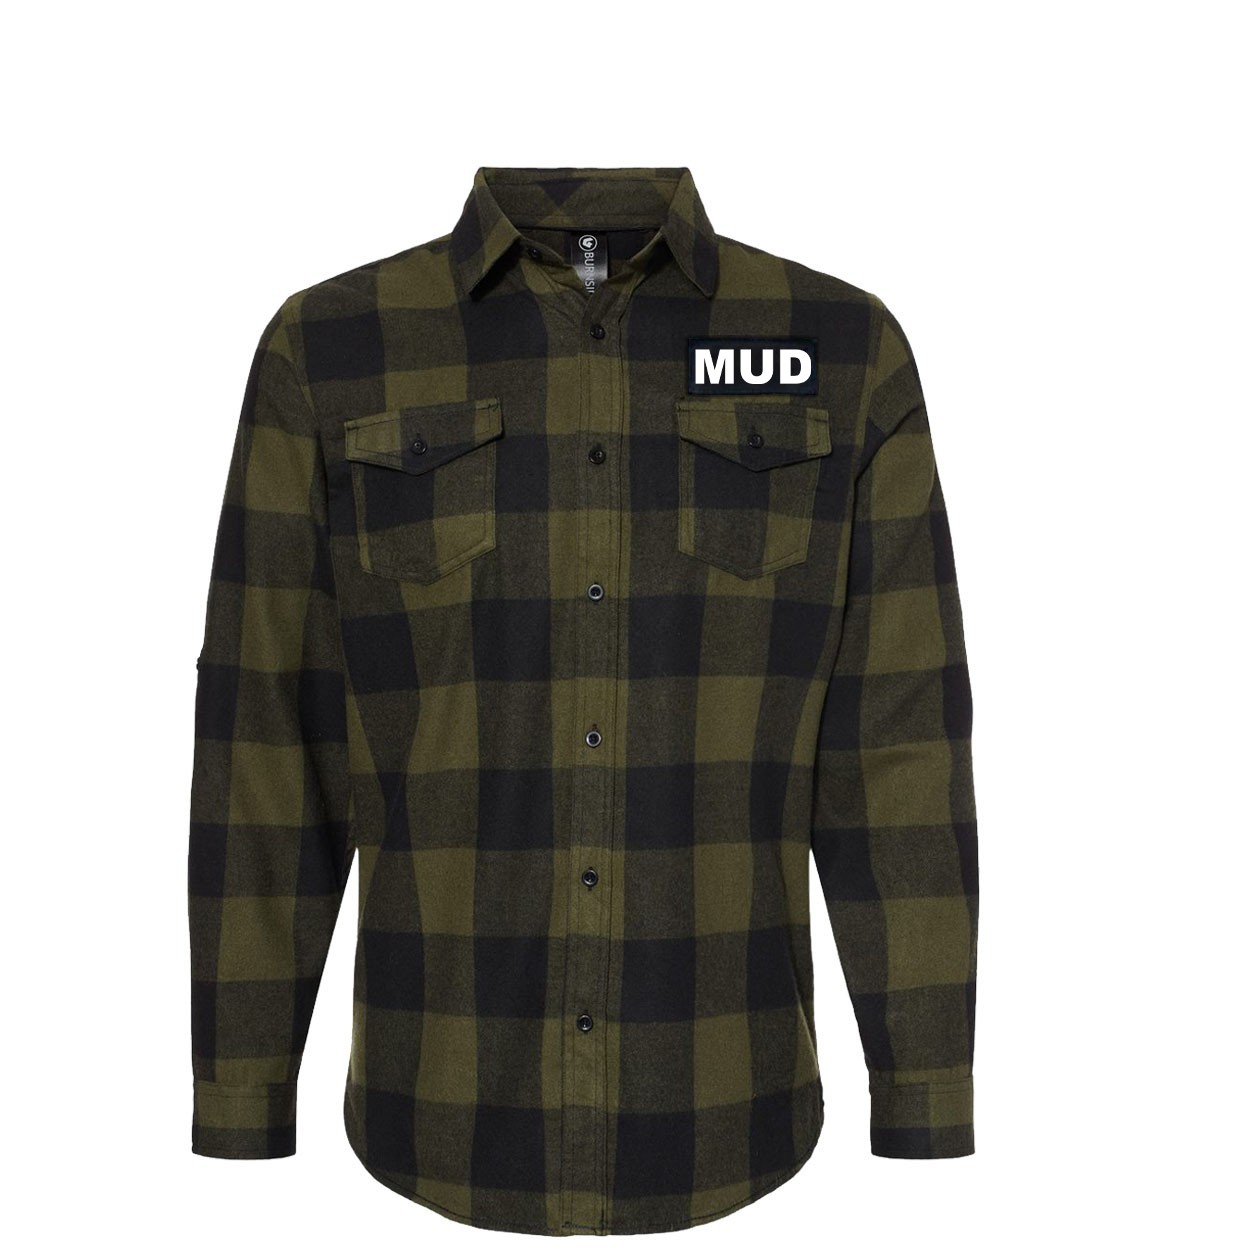 Mud Brand Logo Classic Unisex Long Sleeve Woven Patch Flannel Shirt Army/Black (White Logo)